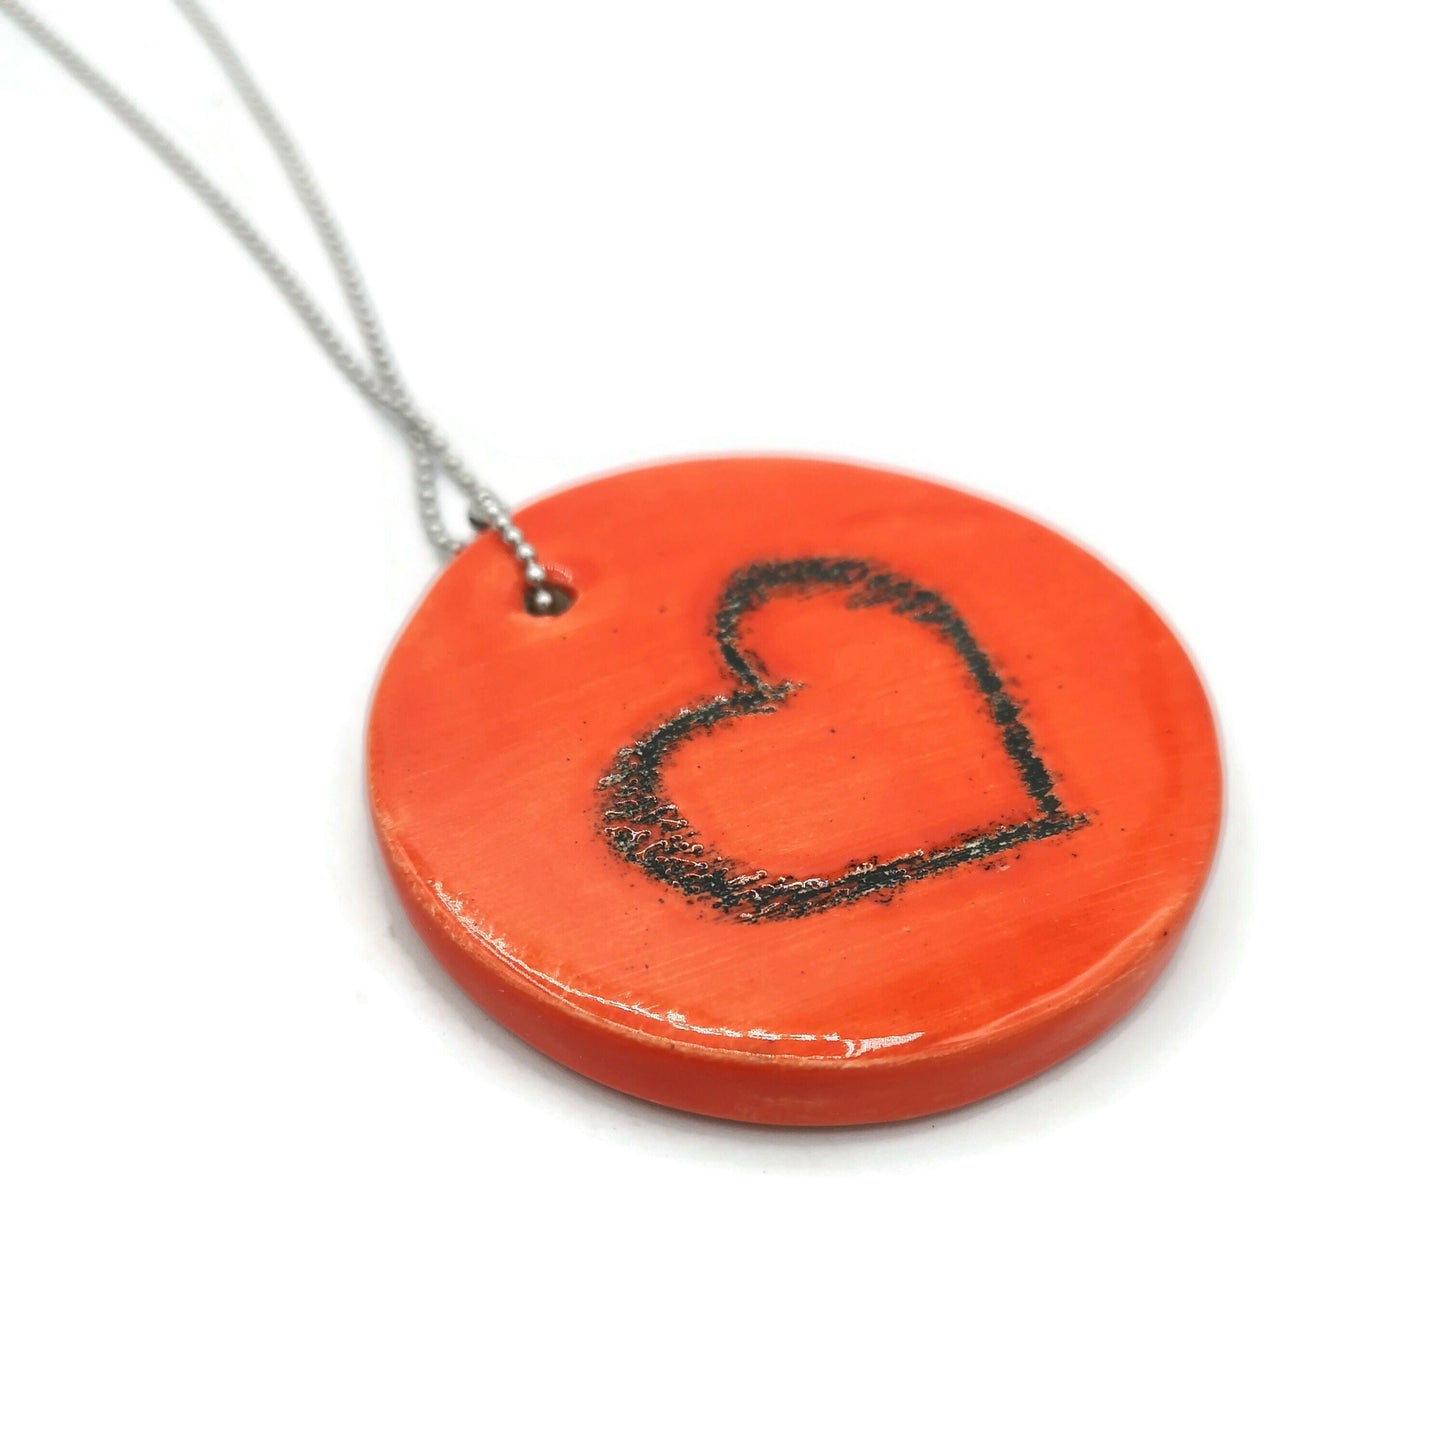 Handmade Ceramic Red Heart Necklace Pendant For Her, Cute Round Pendant, Boho Aesthetic Everyday Necklace, Mothers Day Gift Idea - Ceramica Ana Rafael